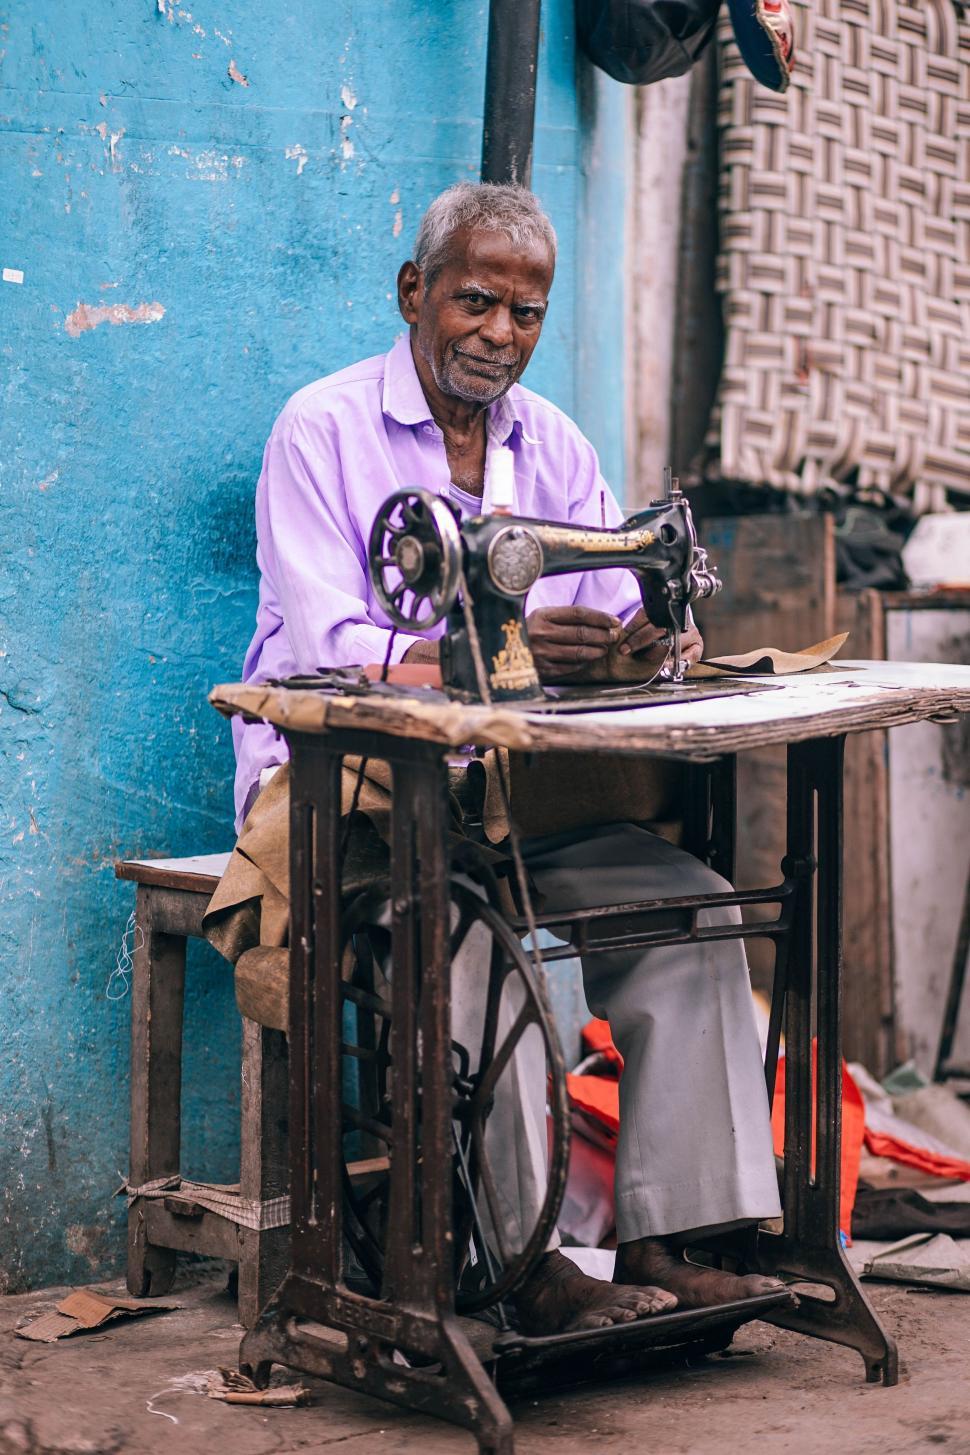 Download Free Stock Photo of Old Indian Tailor 